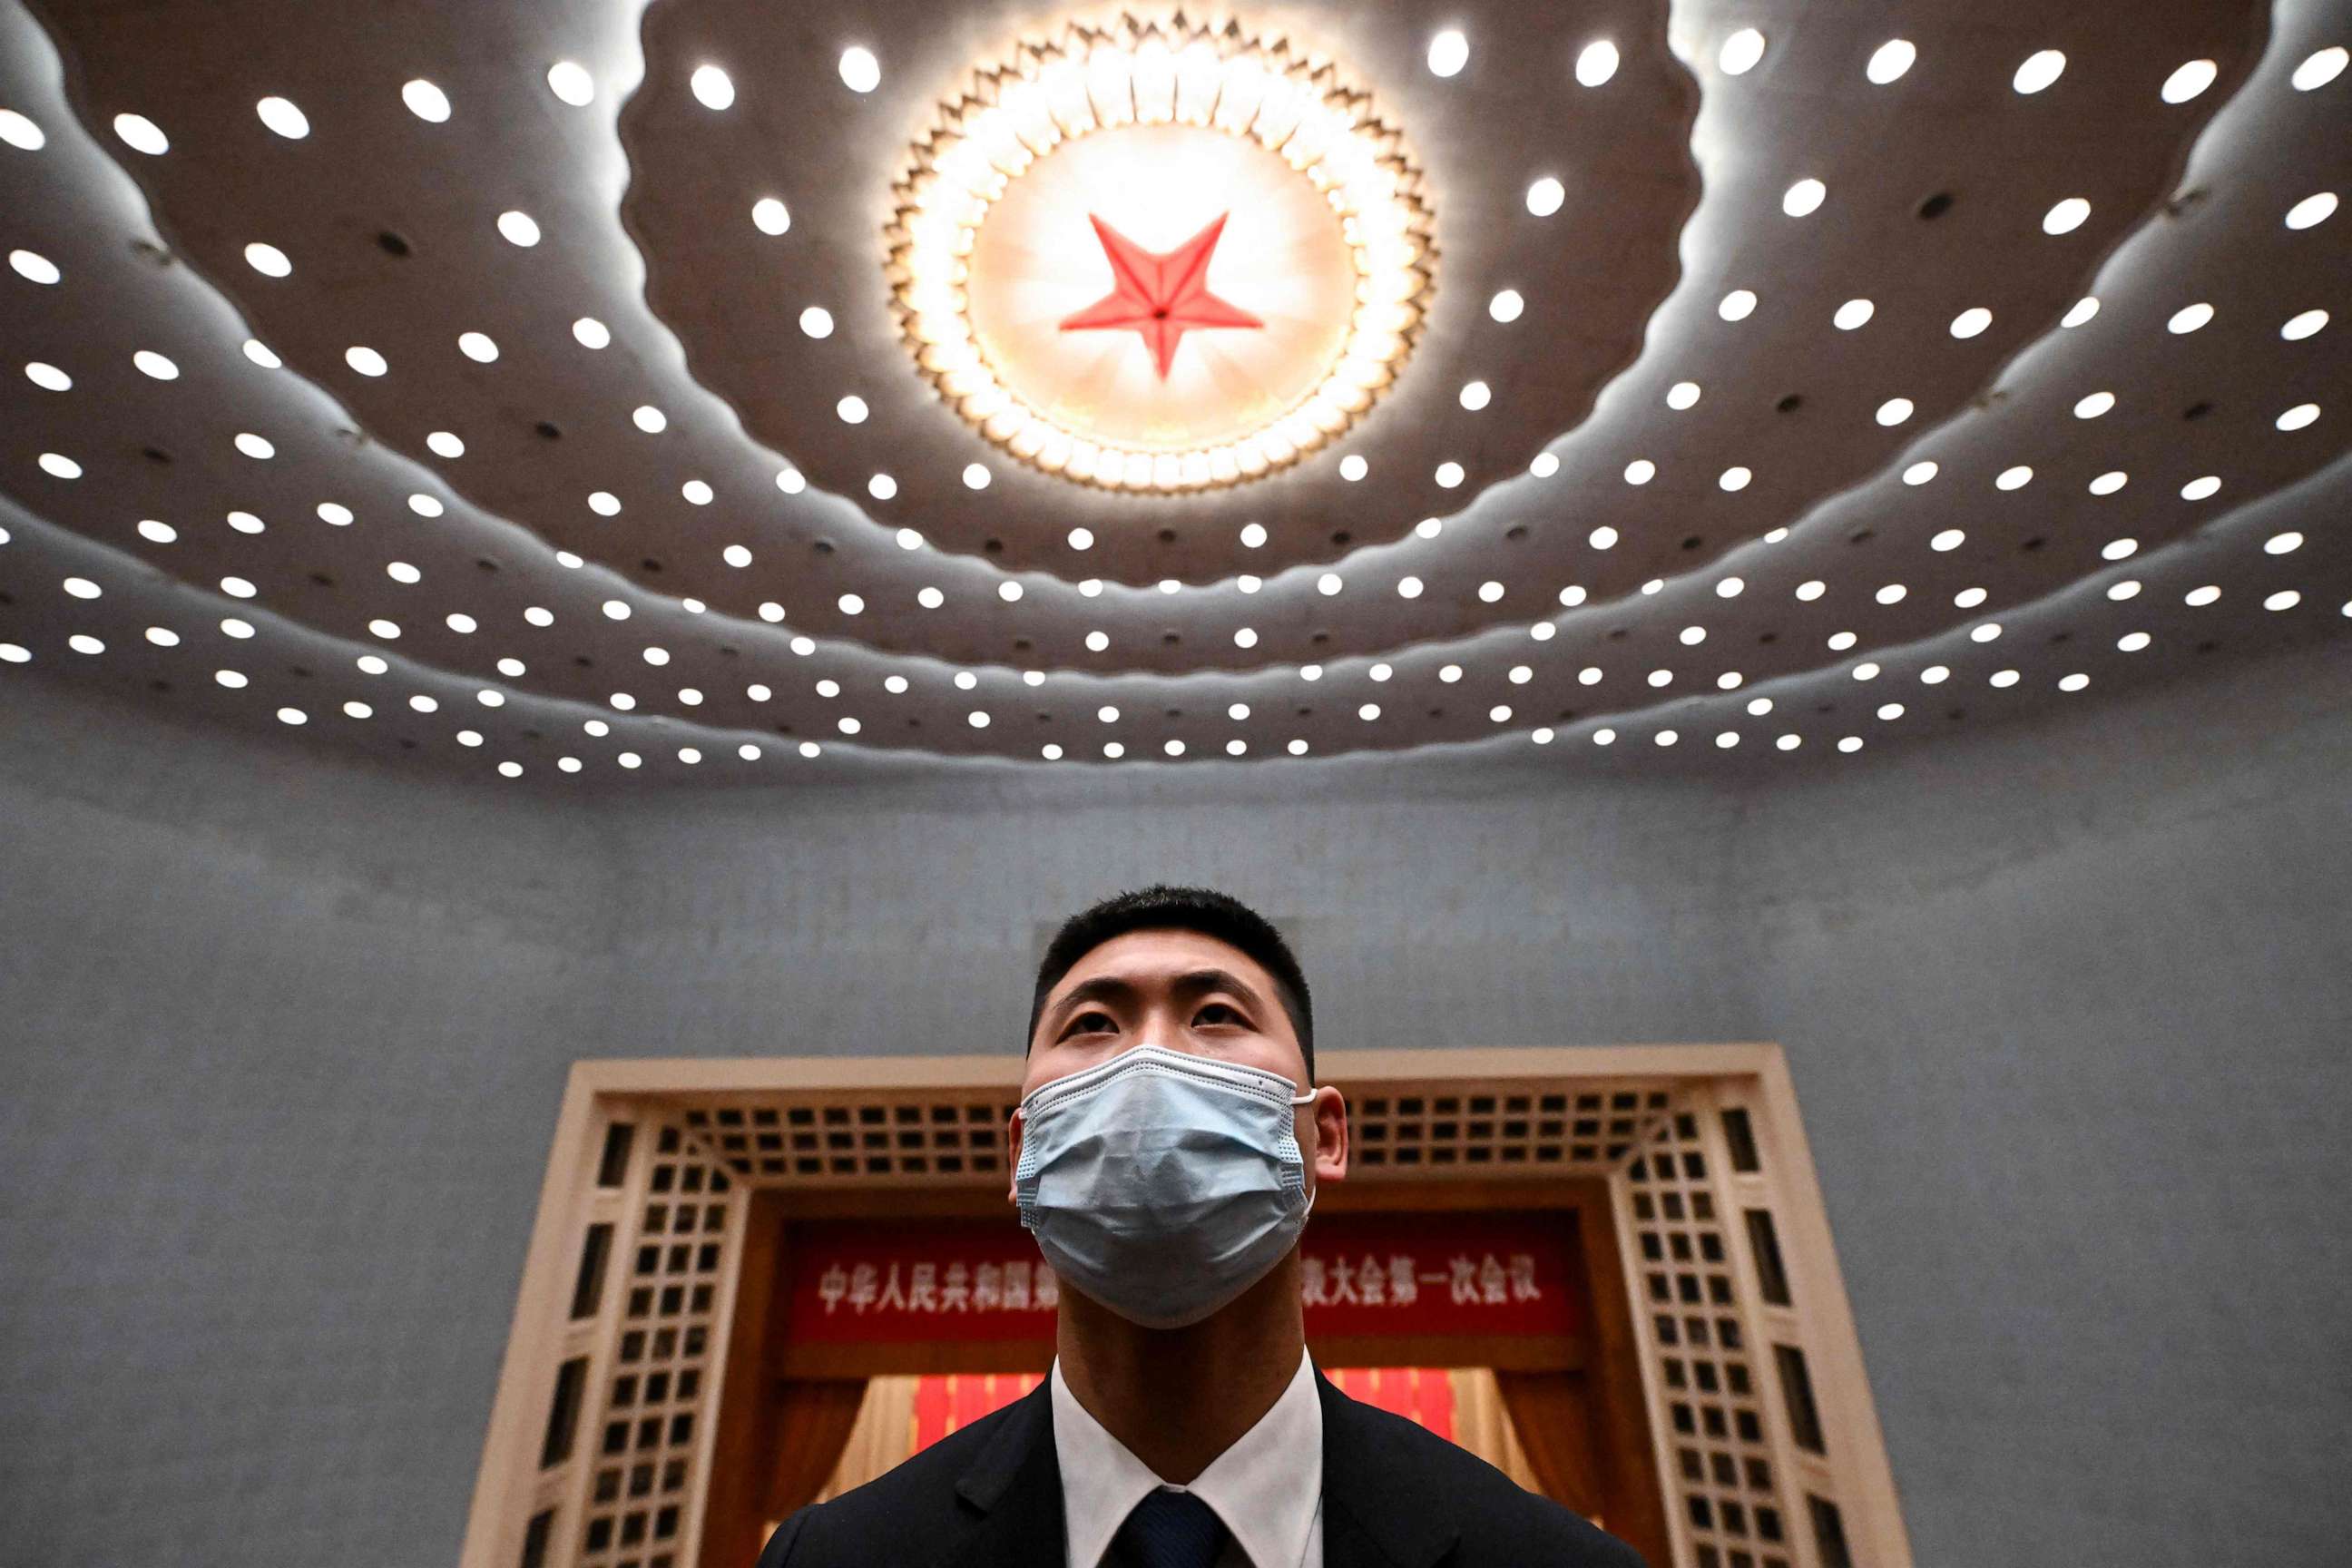 PHOTO: A security officer stands guard after the opening session of the National People's Congress at the Great Hall of the People in Beijing on March 5, 2023.